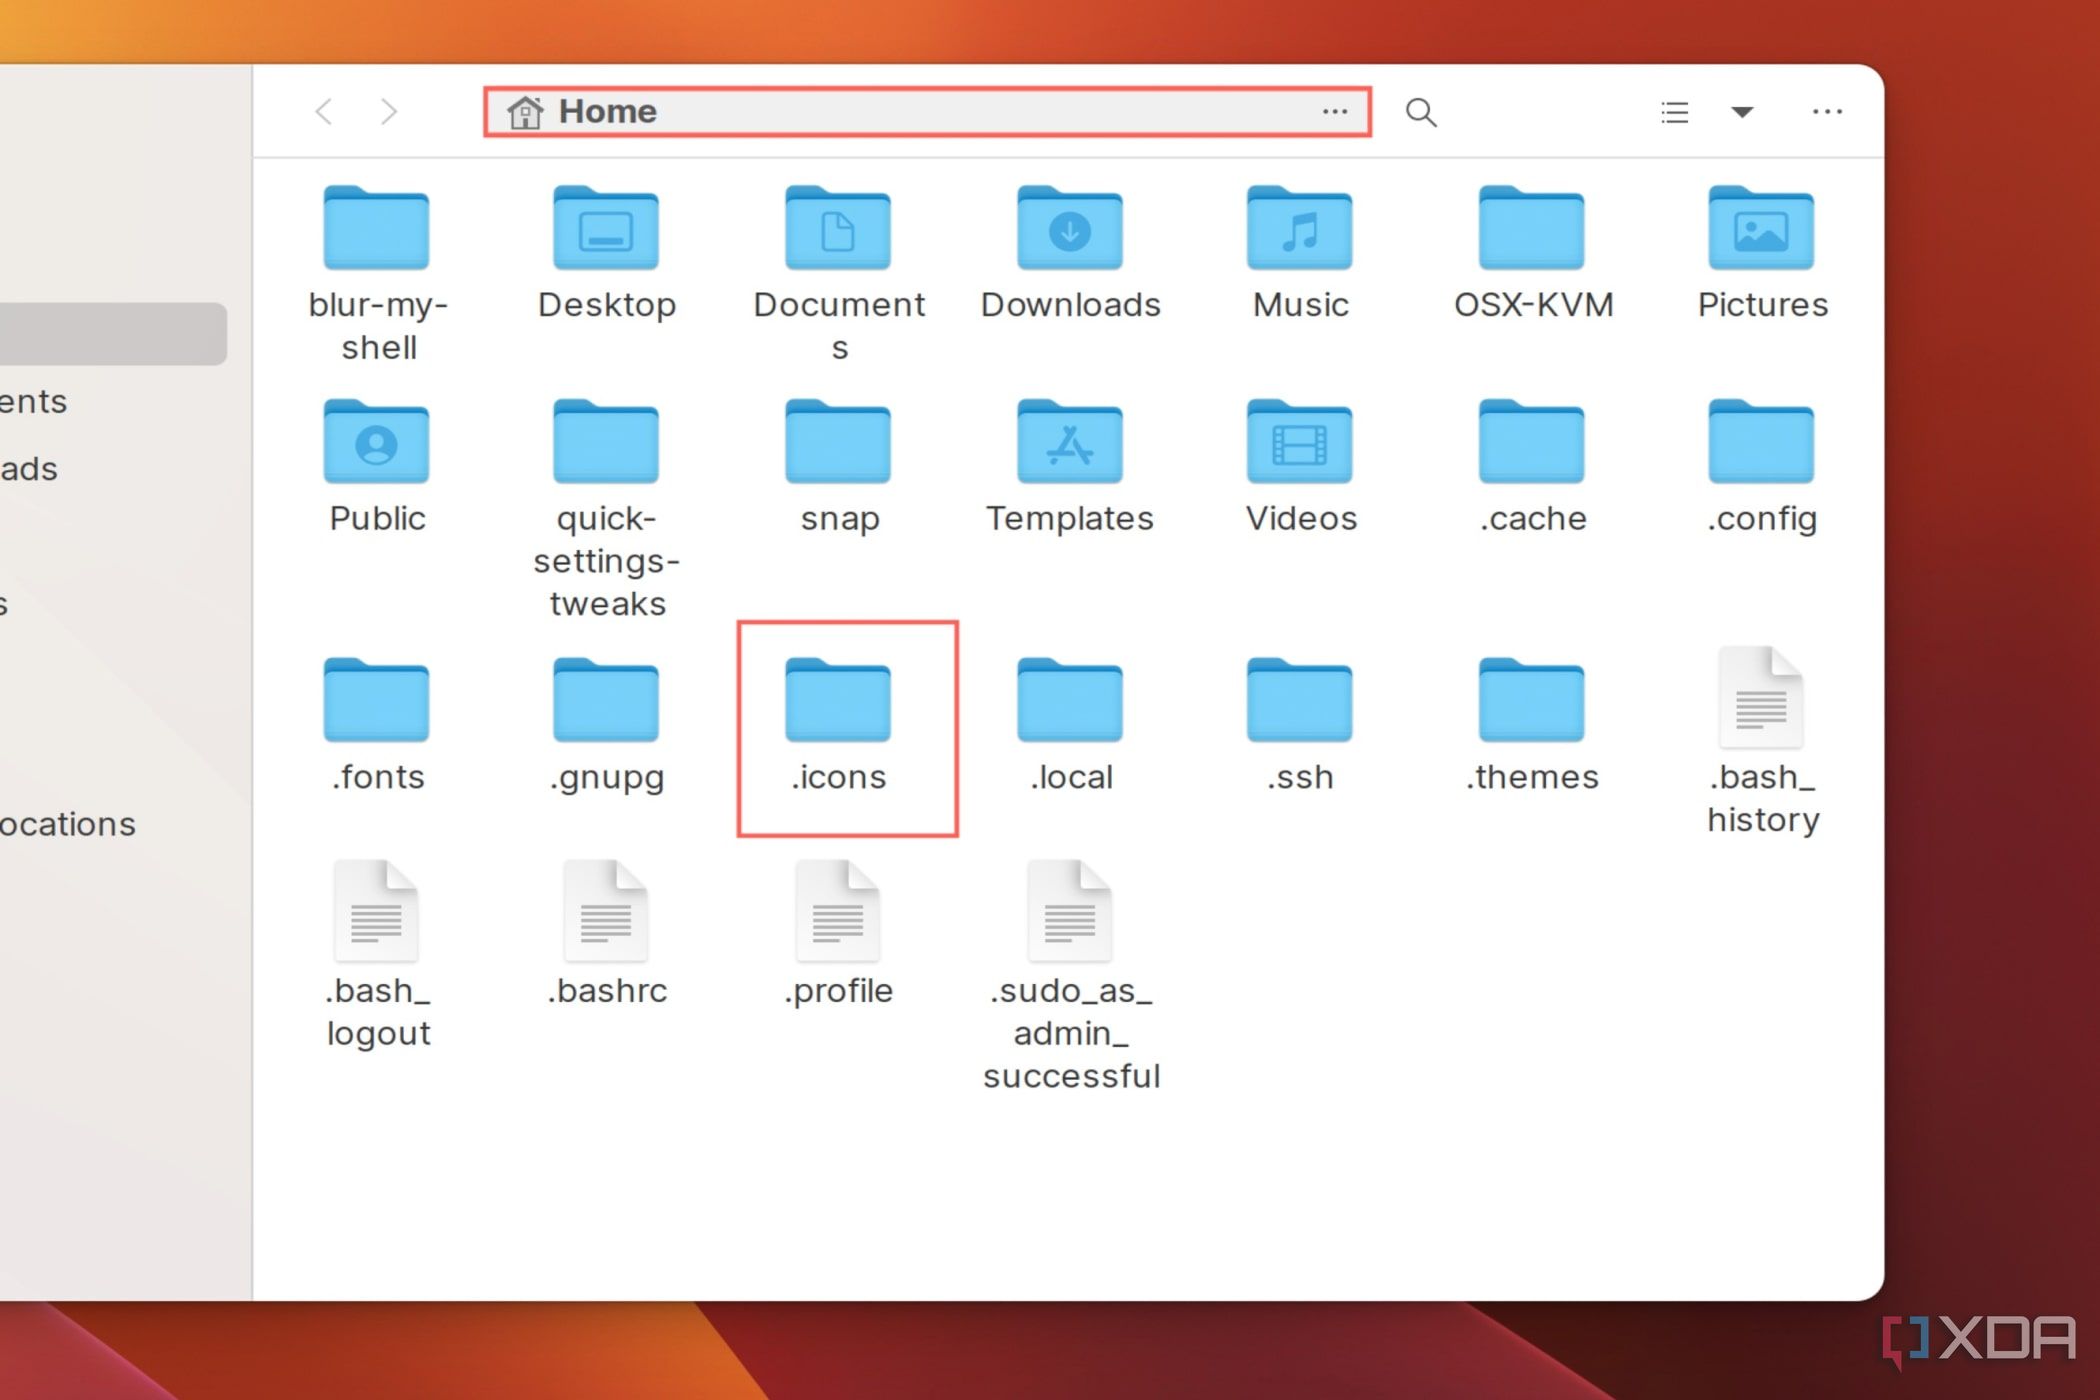 A screenshot of the Ubuntu File Manager with the Home directory and .icons folder highlighted